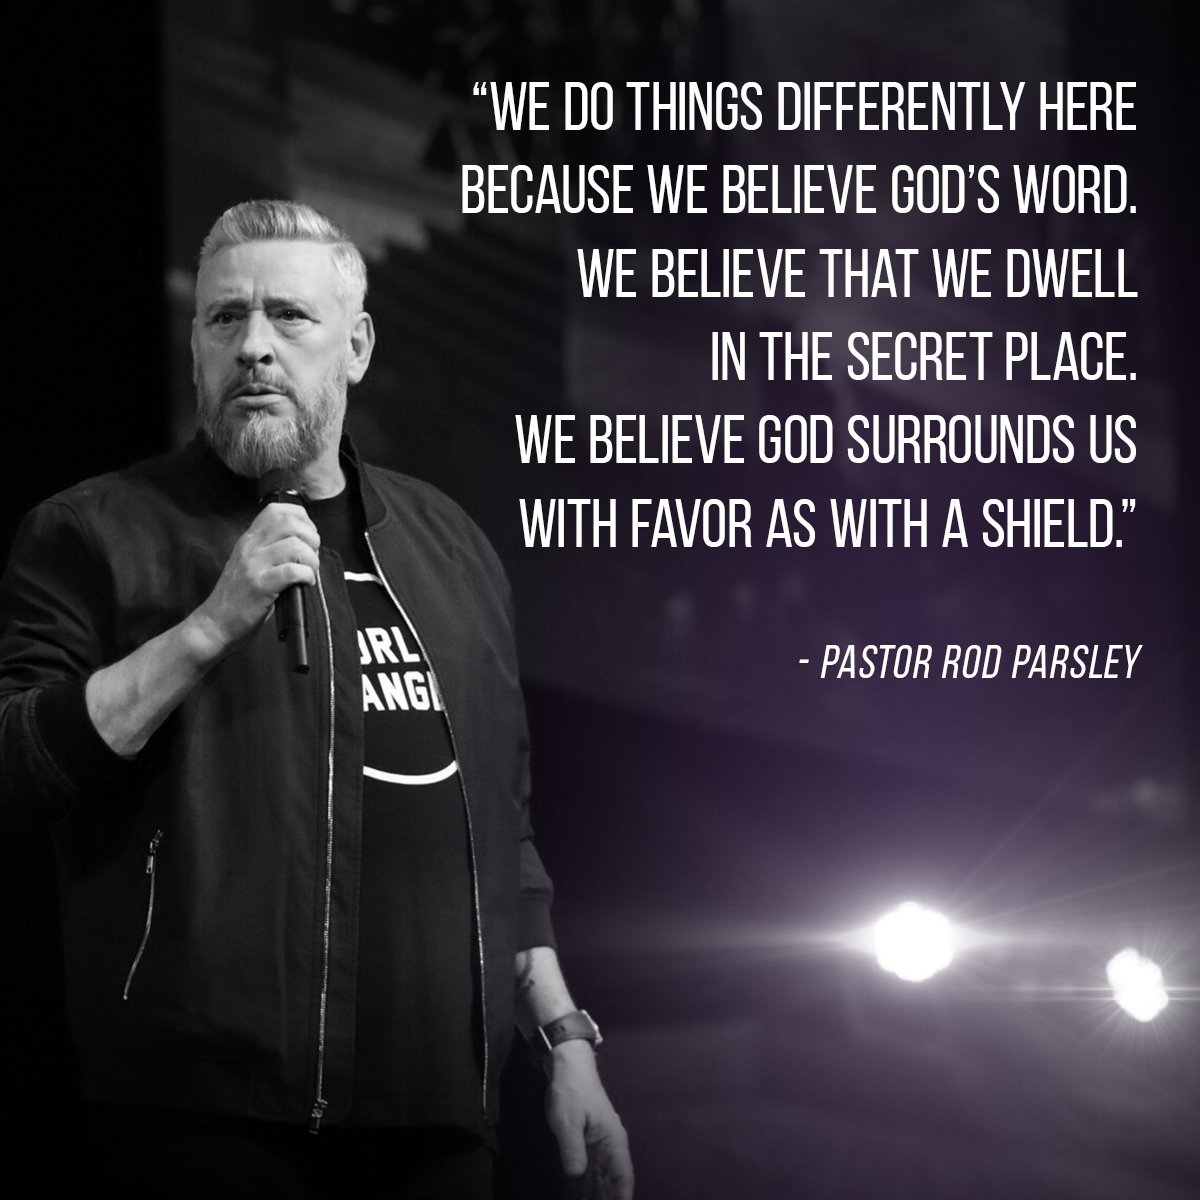 “We do things differently here because we believe God’s word. We believe that we dwell in the secret place. We believe God surrounds us with favor as with a shield.” – Pastor Rod Parsley